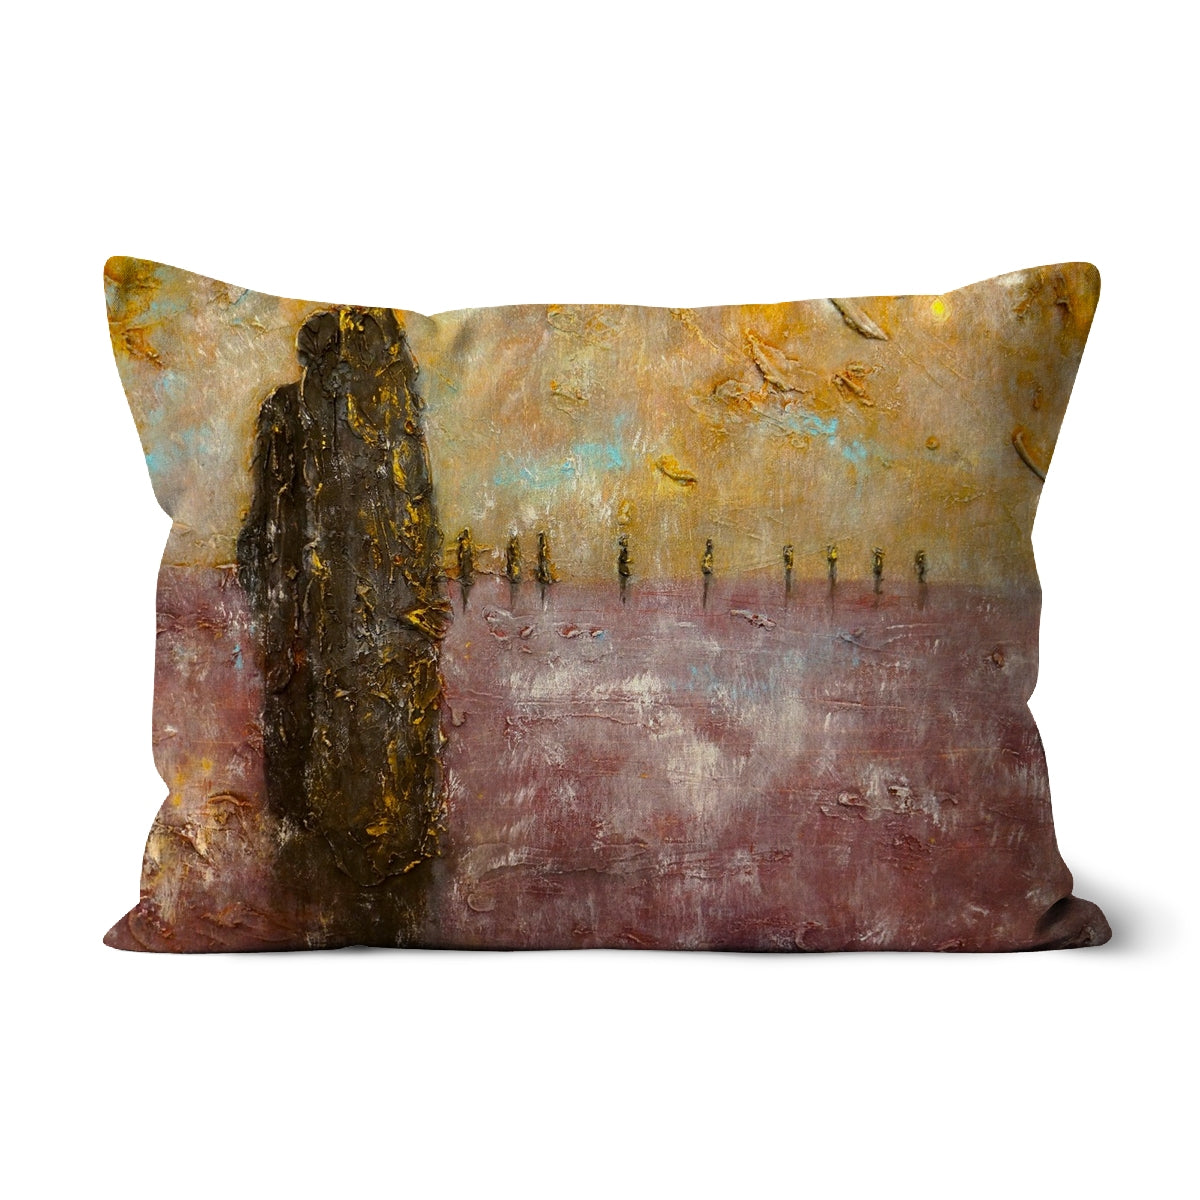 Bordgar Mist Orkney Art Gifts Cushion-Cushions-Orkney Art Gallery-Canvas-19"x13"-Paintings, Prints, Homeware, Art Gifts From Scotland By Scottish Artist Kevin Hunter